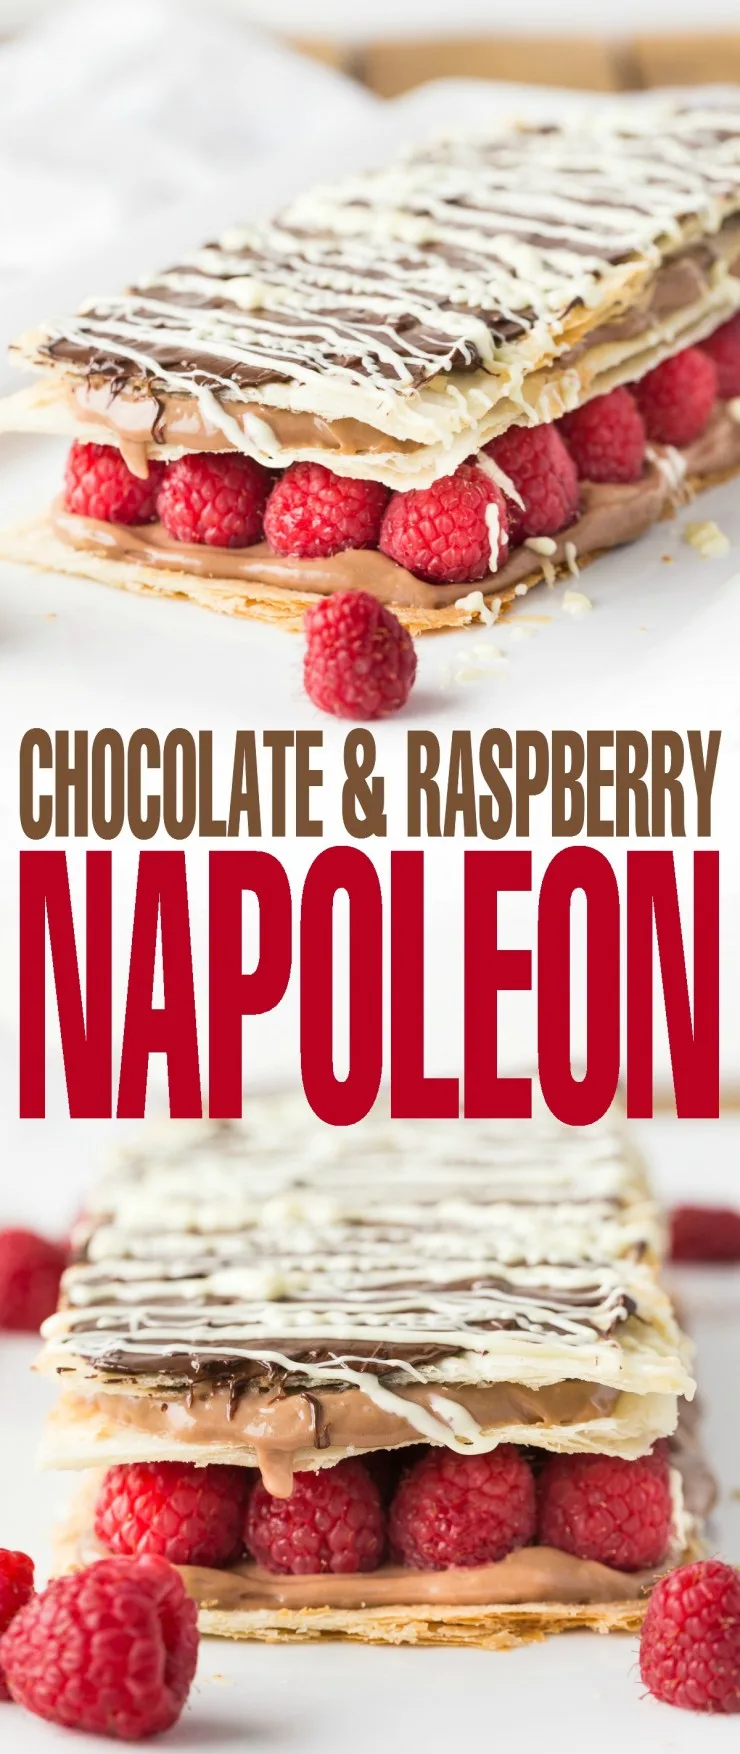 Make a decadent bakery shop treat at home with this indulgent recipe for a Chocolate and Raspberry Napoleon. Fresh raspberries stud chocolate pastry cream layered between airy sheets of puff pastry in this chocolate-raspberry dessert. A match made in heaven!